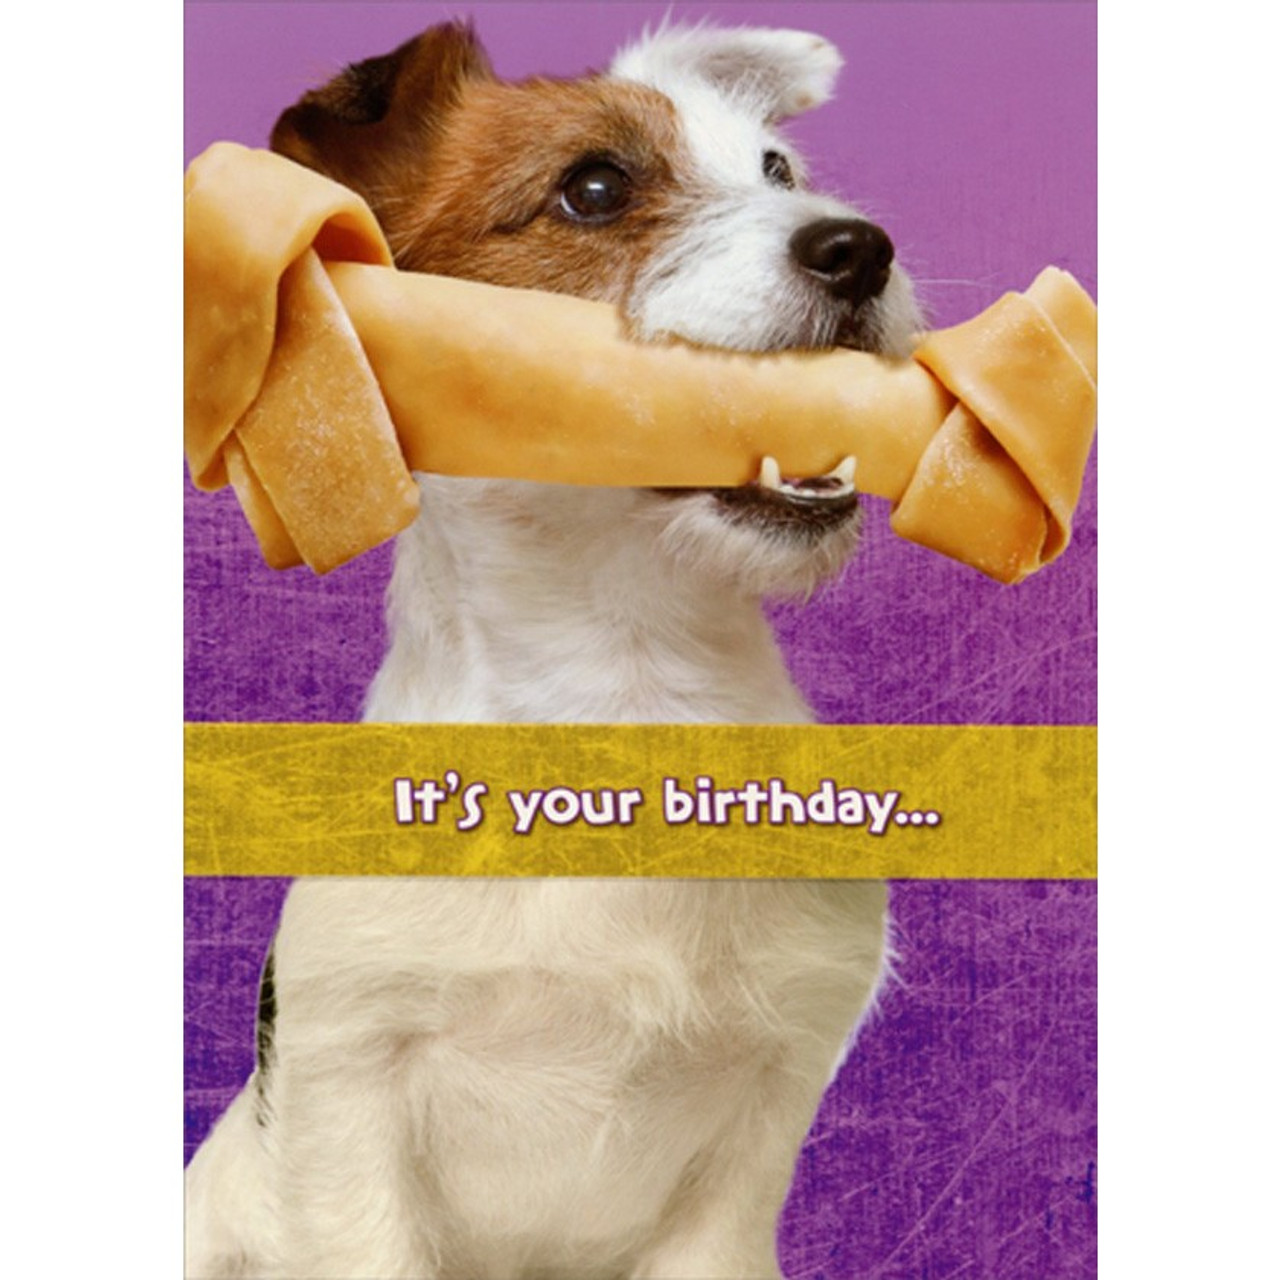 Jack Russell Terrier with Rawhide Bone Funny : Humorous Dog Birthday ...